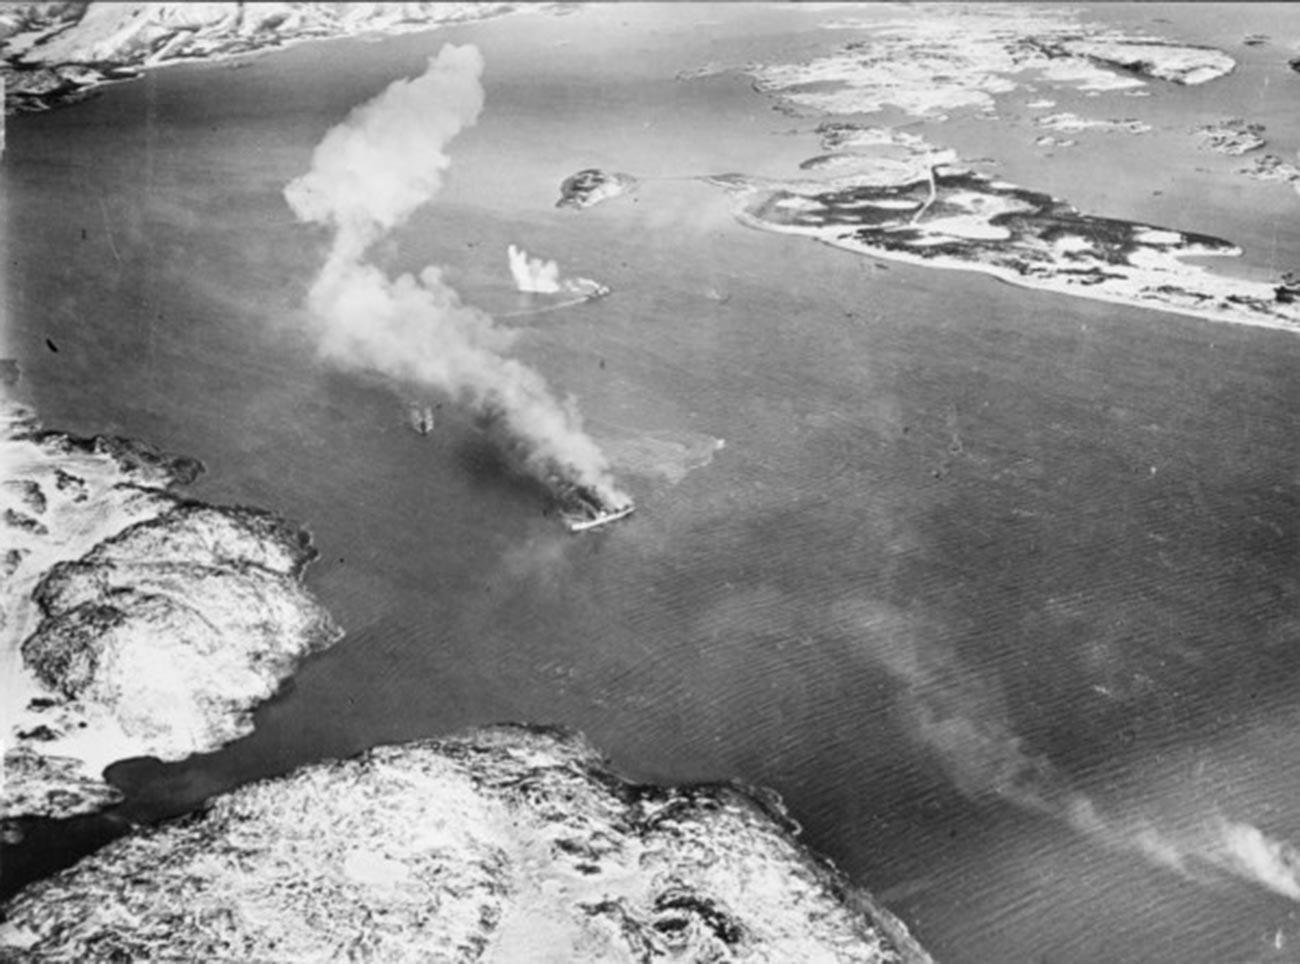 The German-controlled prisoner ship Rigel and a small V-boat escort burning after being bombed and strafed by British aircraft.